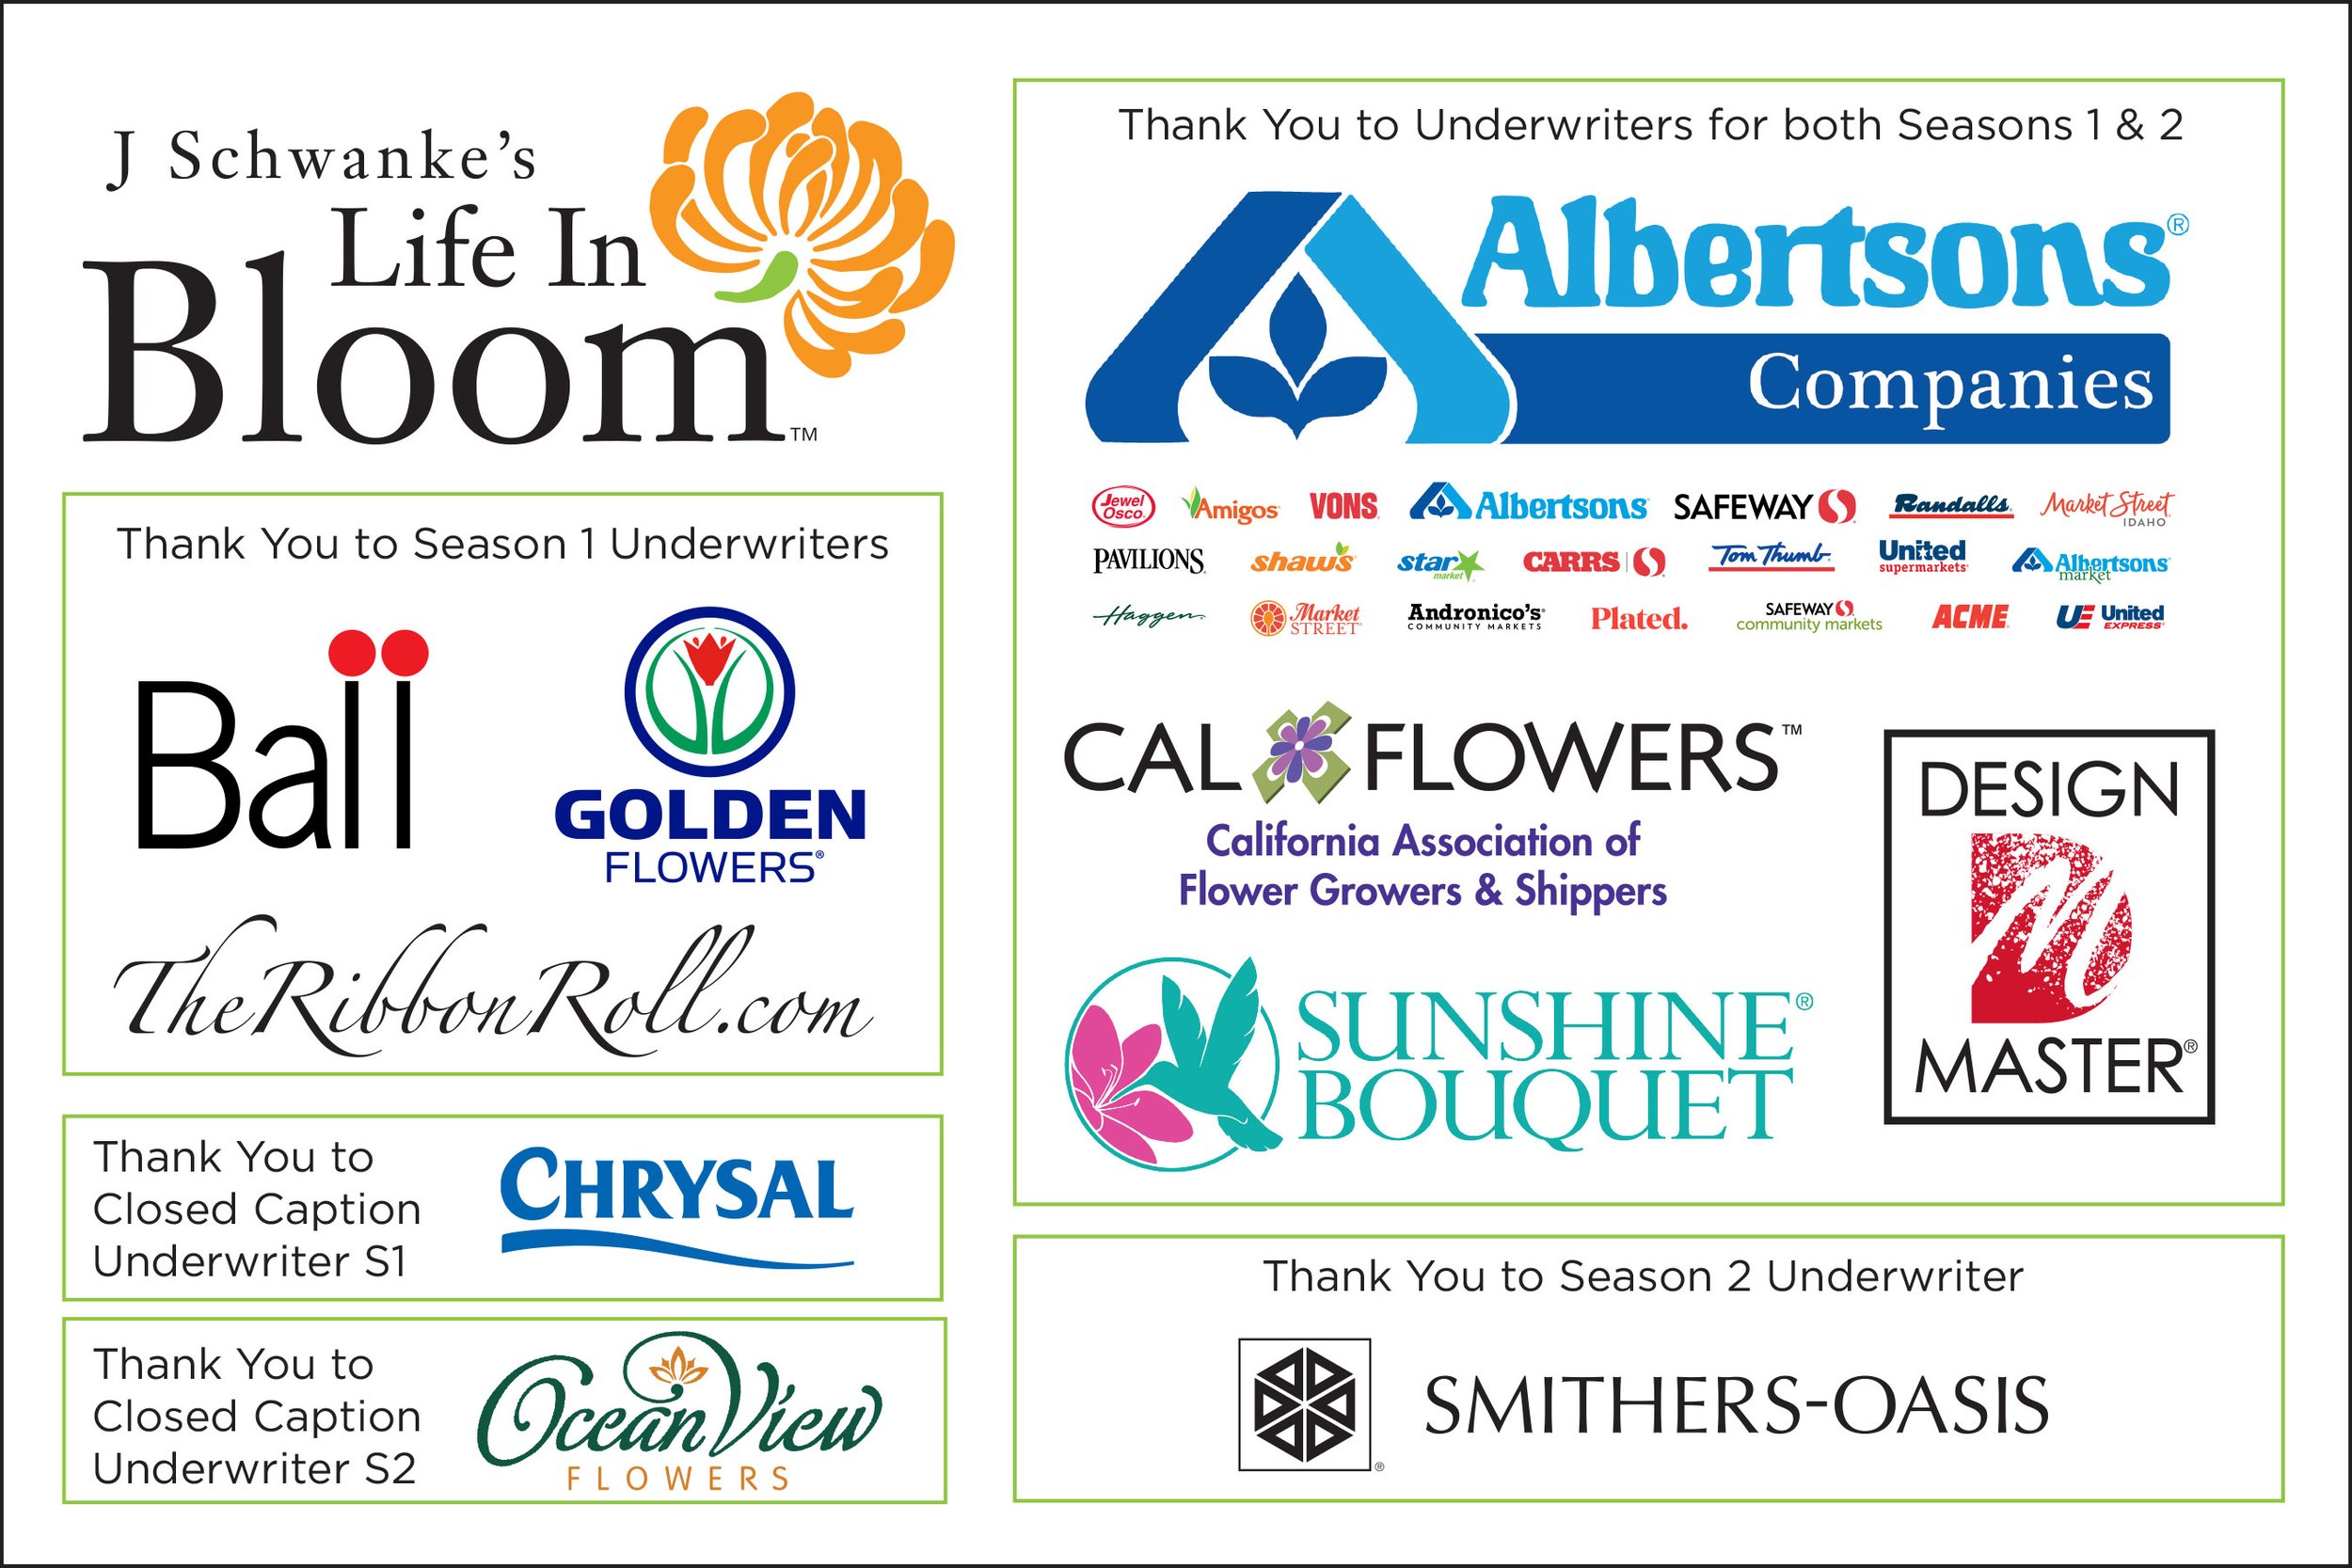 Thank you to our "Life in Bloom" Underwriters - that make "J Schwanke's Life in Bloom" possible... Learn More!